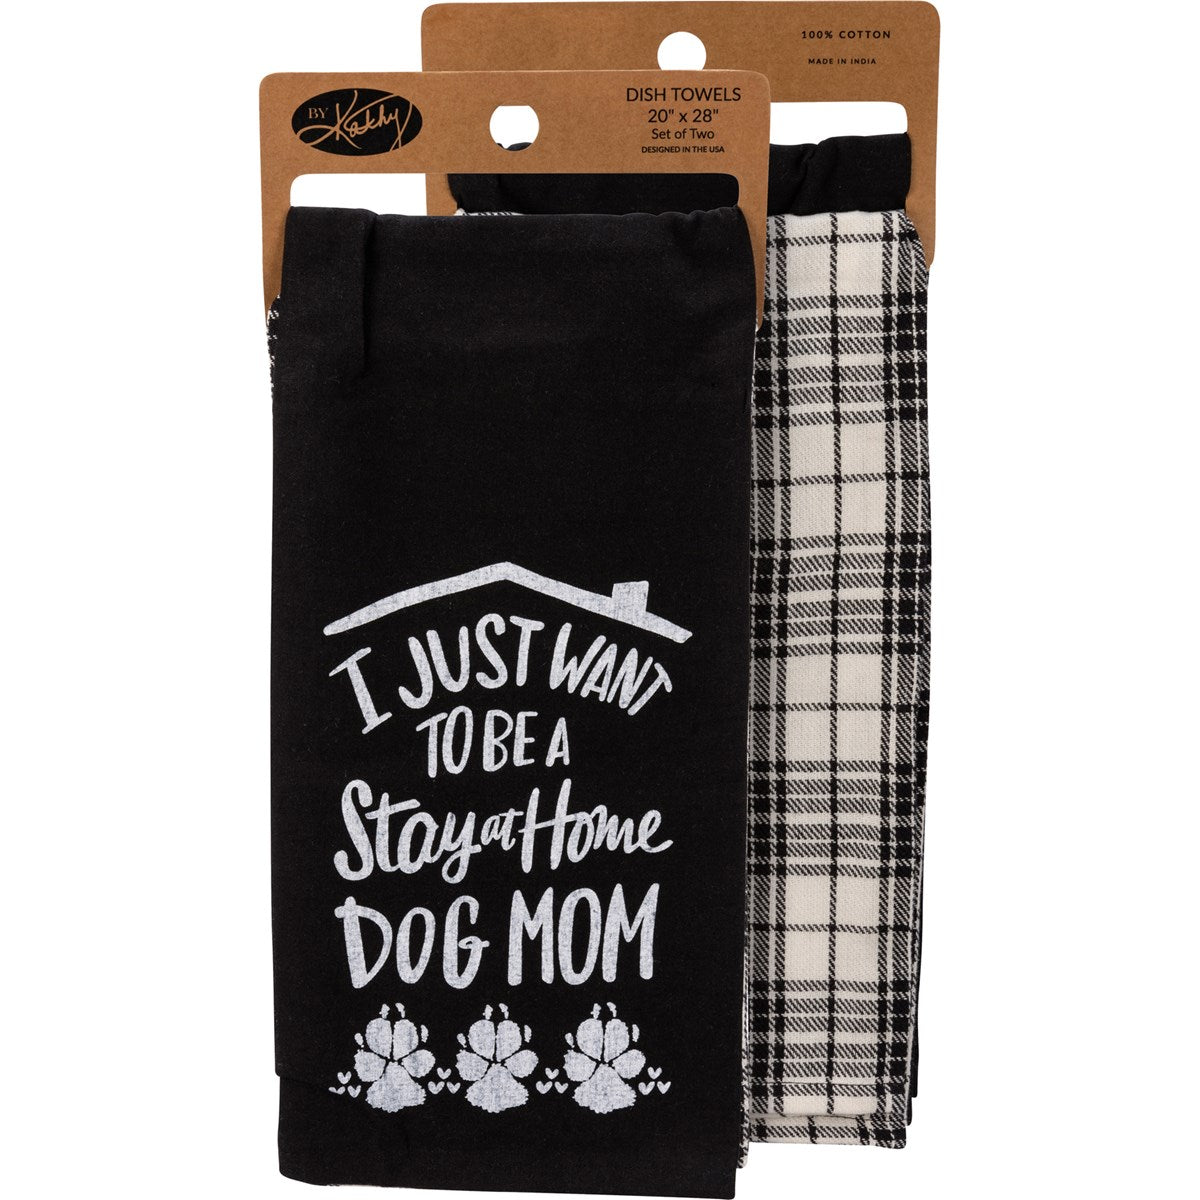 I Just Want To Be A Stay At Home Dog Mom - Tea Towel